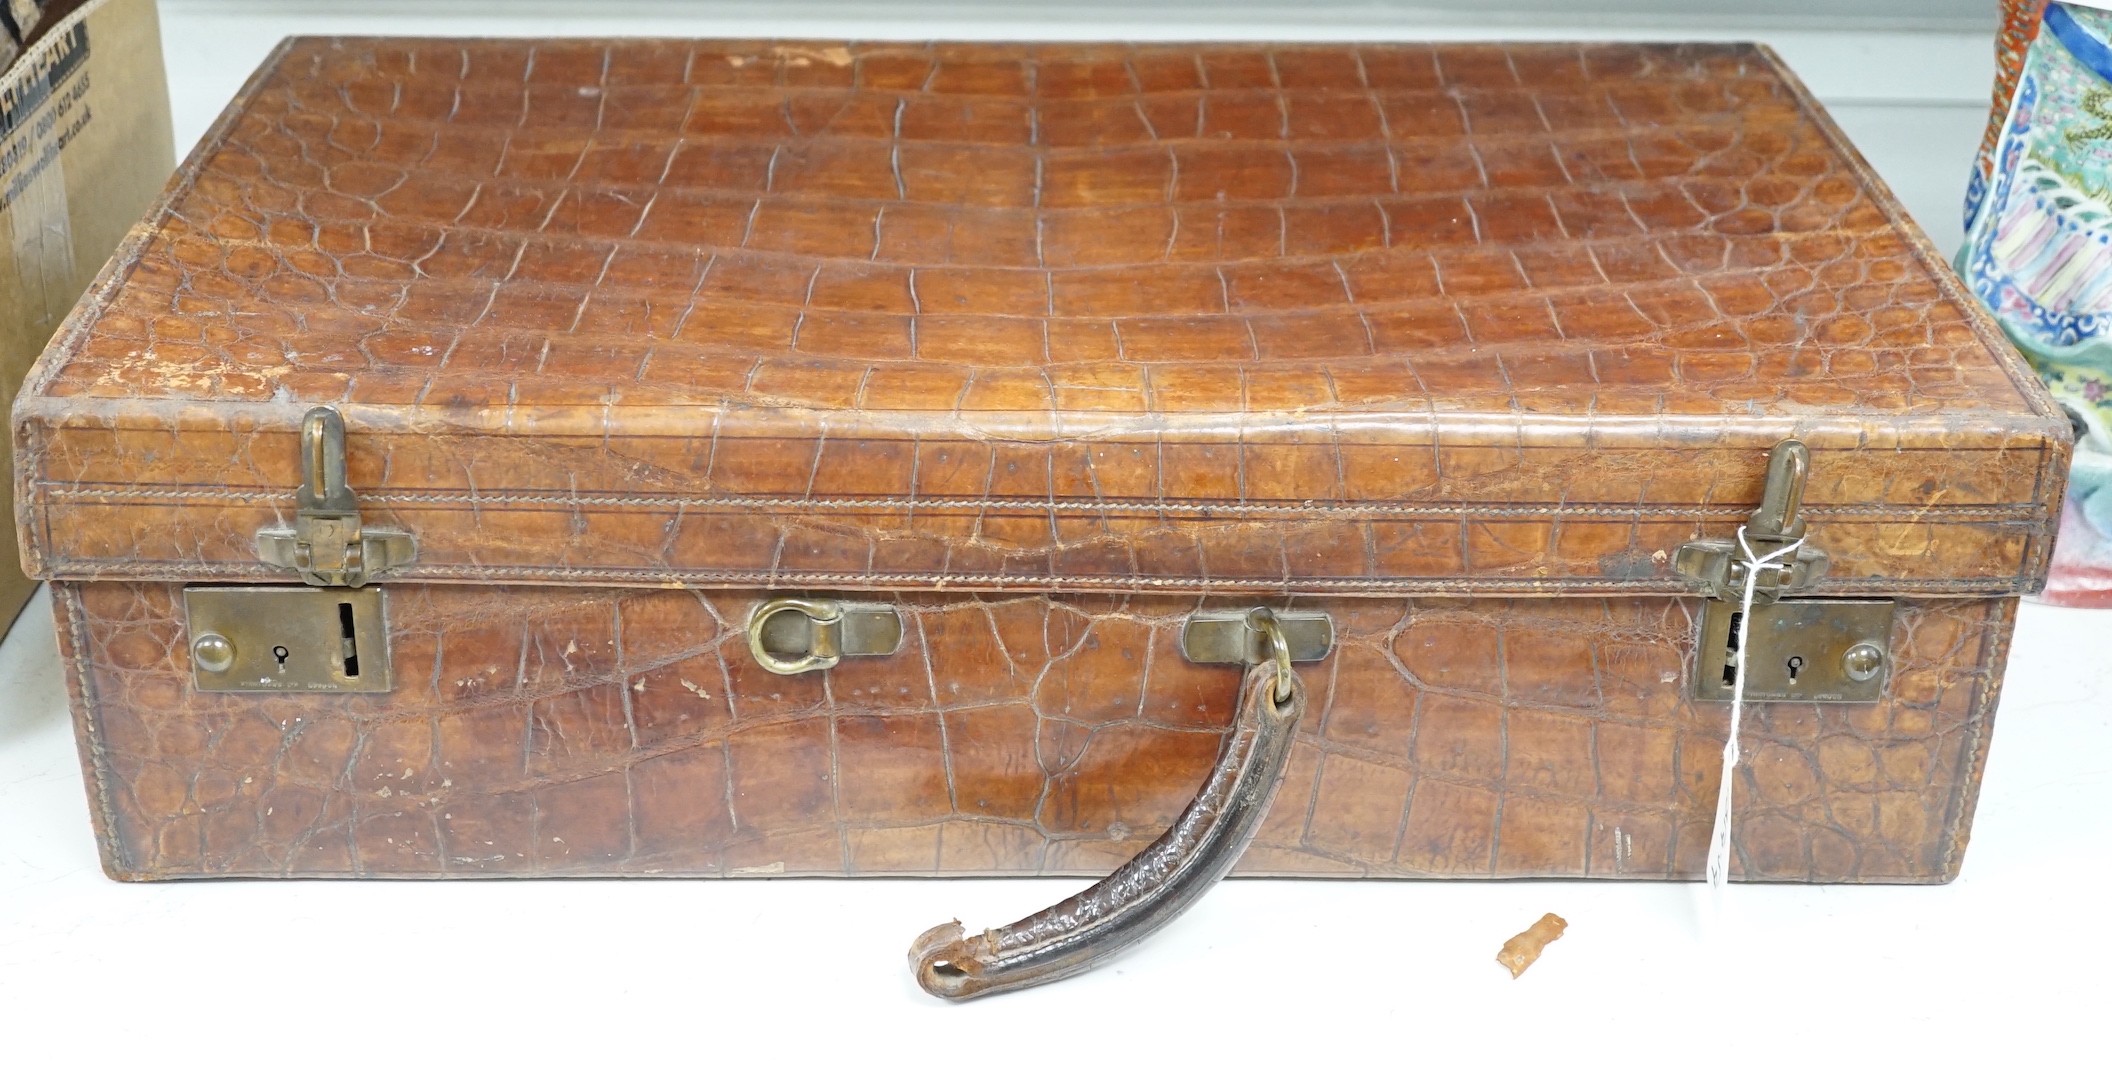 An early 20th century crocodile skin suitcase - 60cm wide